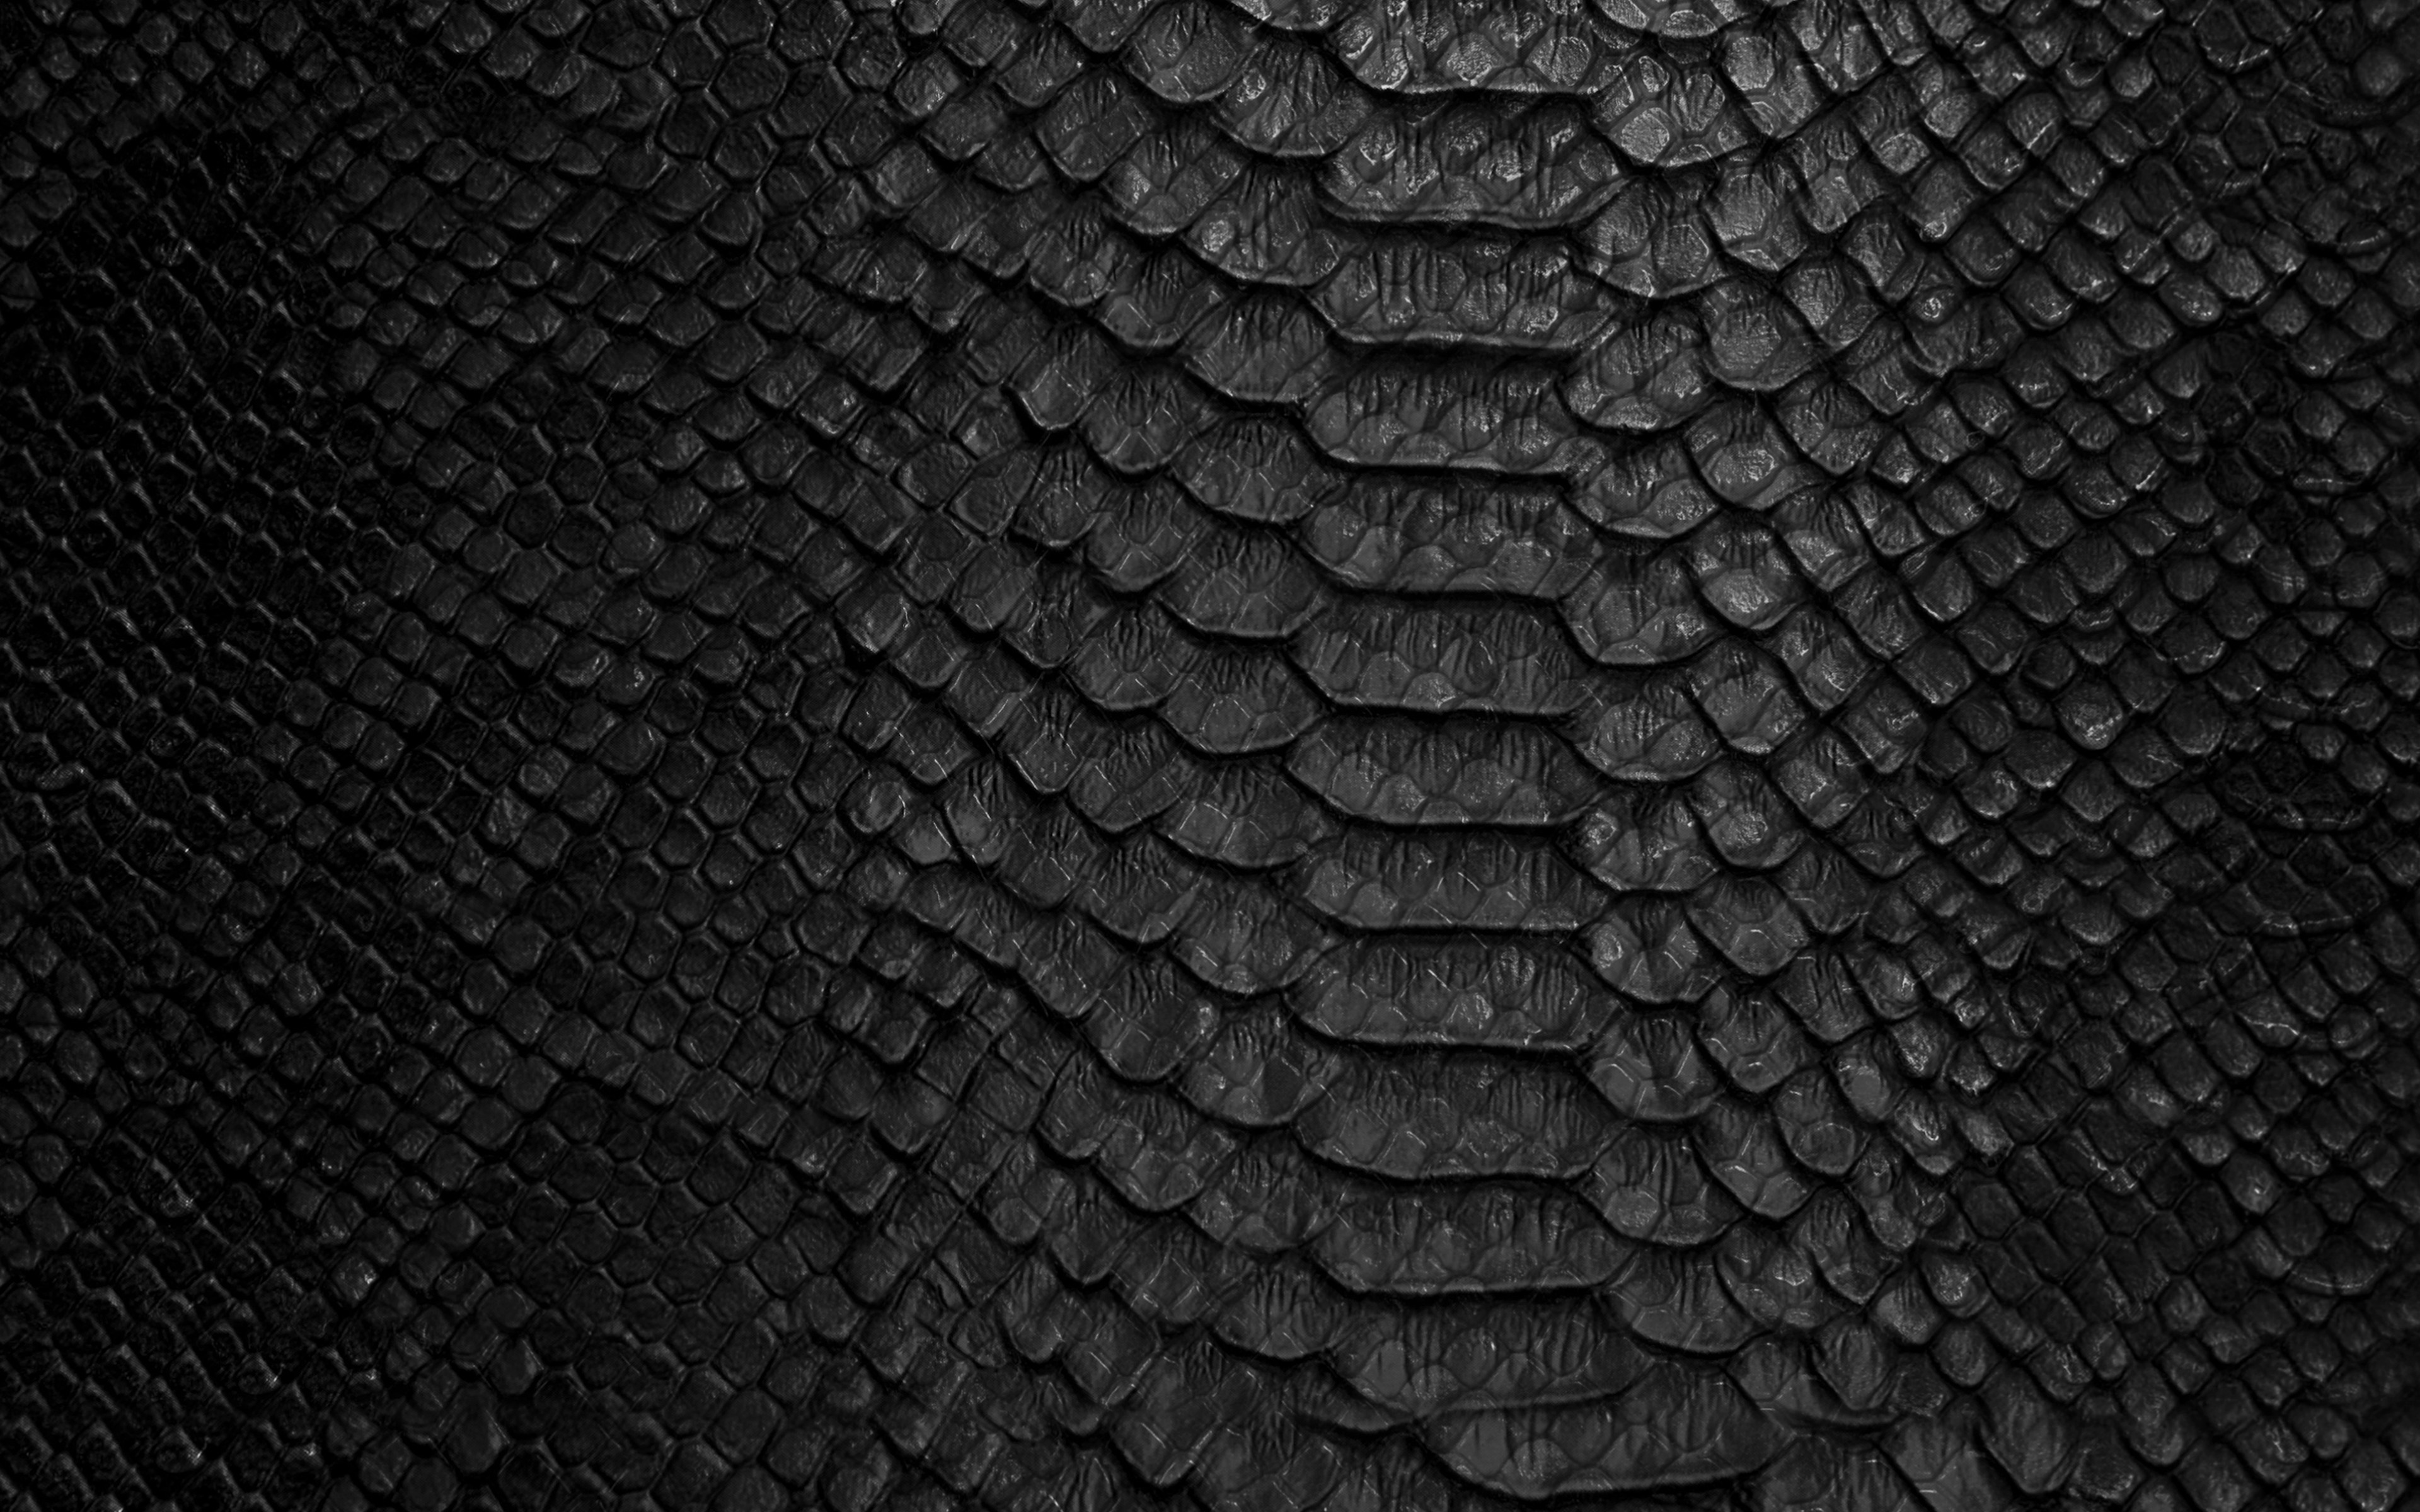 Download wallpaper black snake leather texture, snake skin background, cobra texture, black creative background, snake for desktop with resolution 3840x2400. High Quality HD picture wallpaper